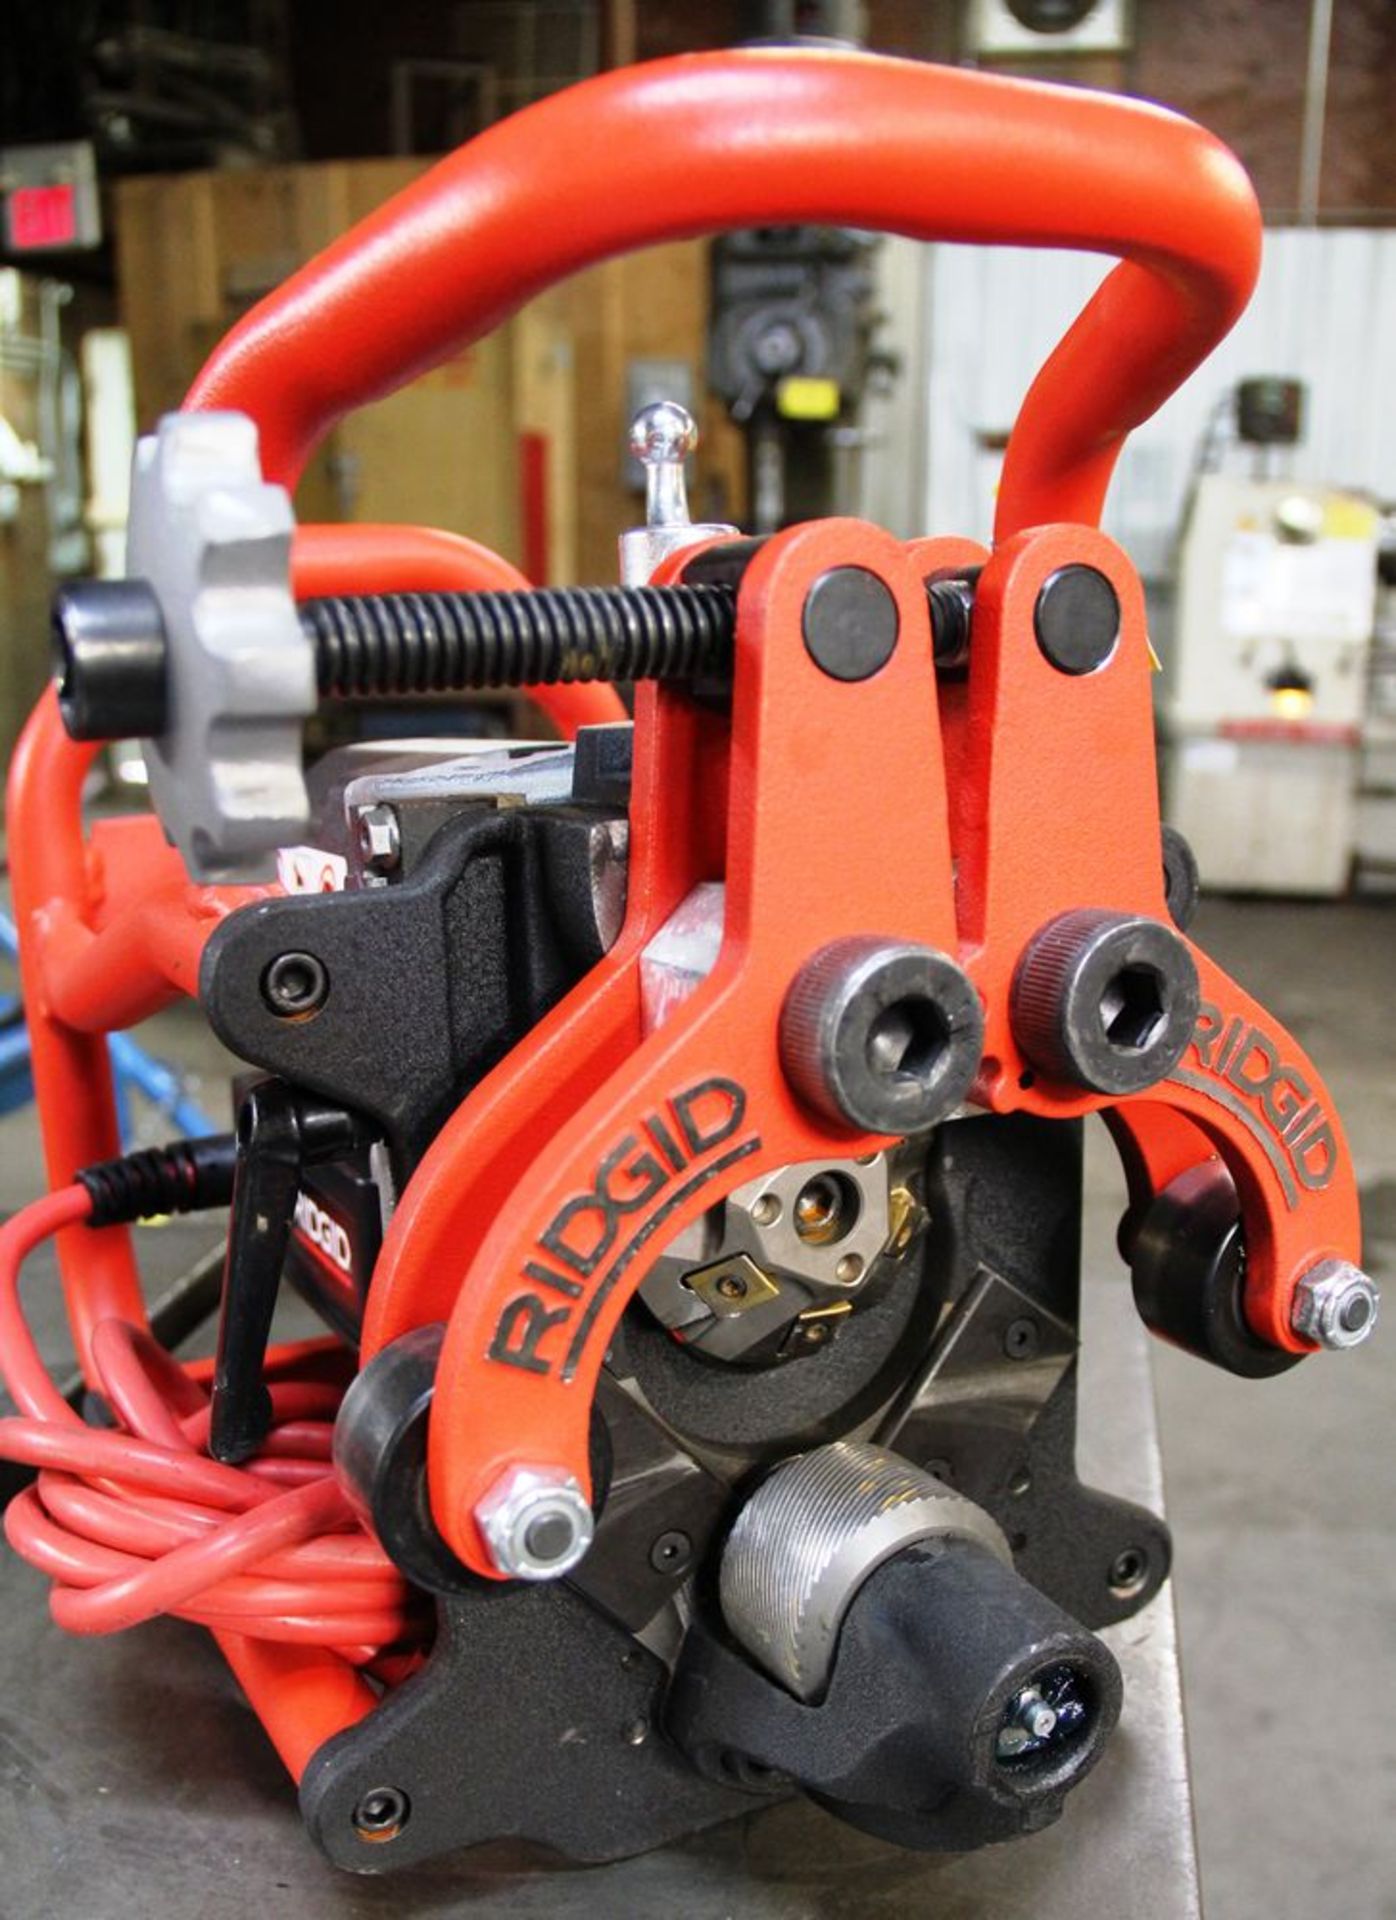 RIDGID B-500 TRANSPORTABLE PIPE BEVELLER, ELECTRIC POWERED, 115 VOLTS, 50/60HZ, S/N EBY04270818 - Image 2 of 4